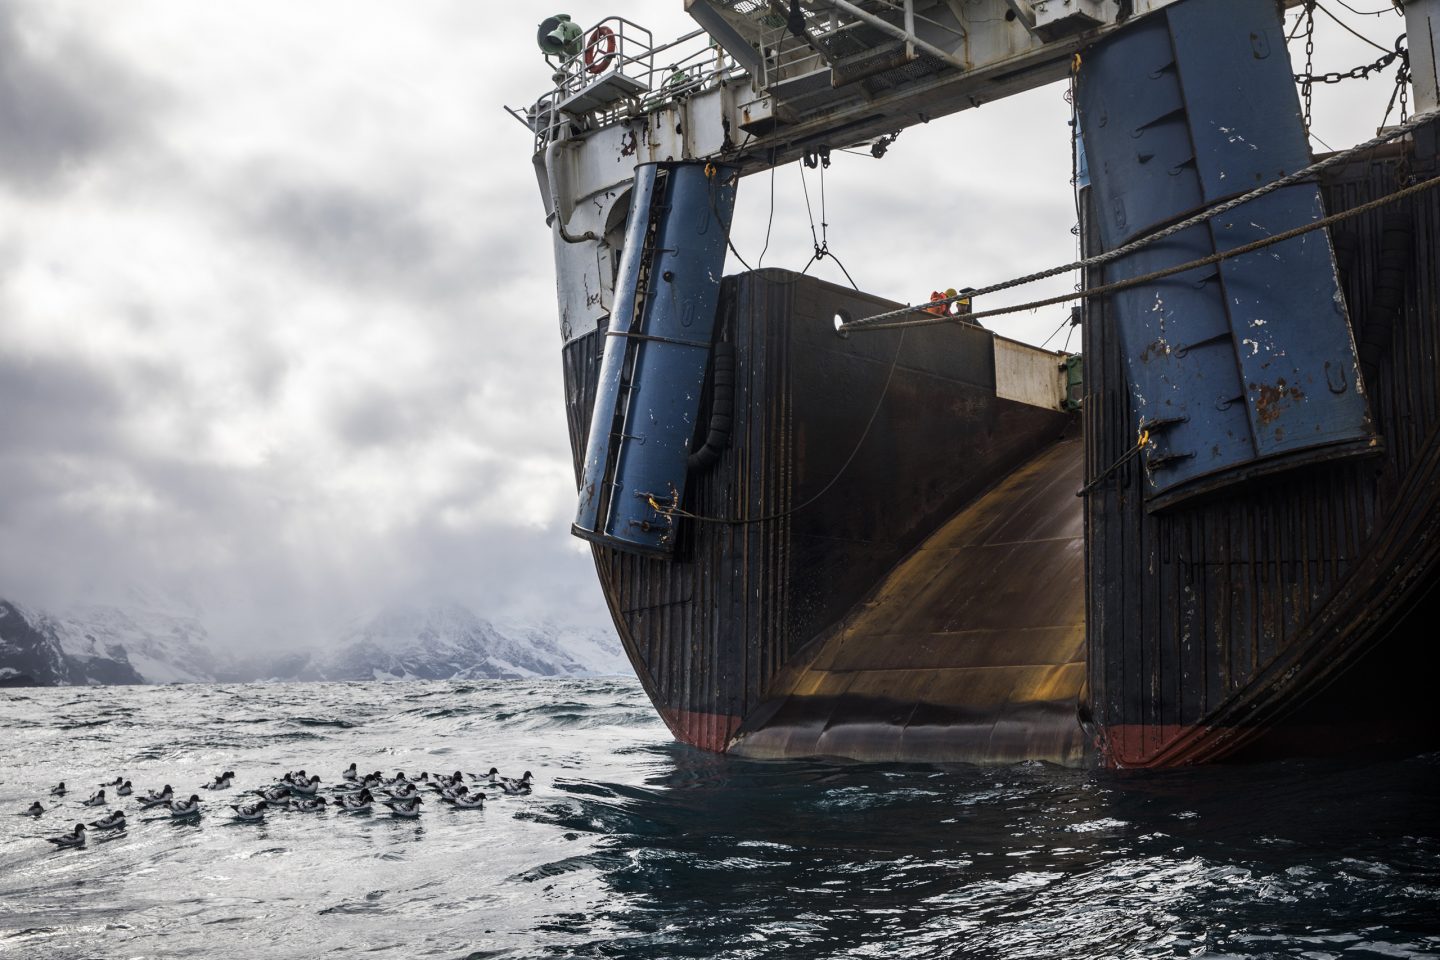 A krill fishing vessel off the South Orkney Islands in Antarctica